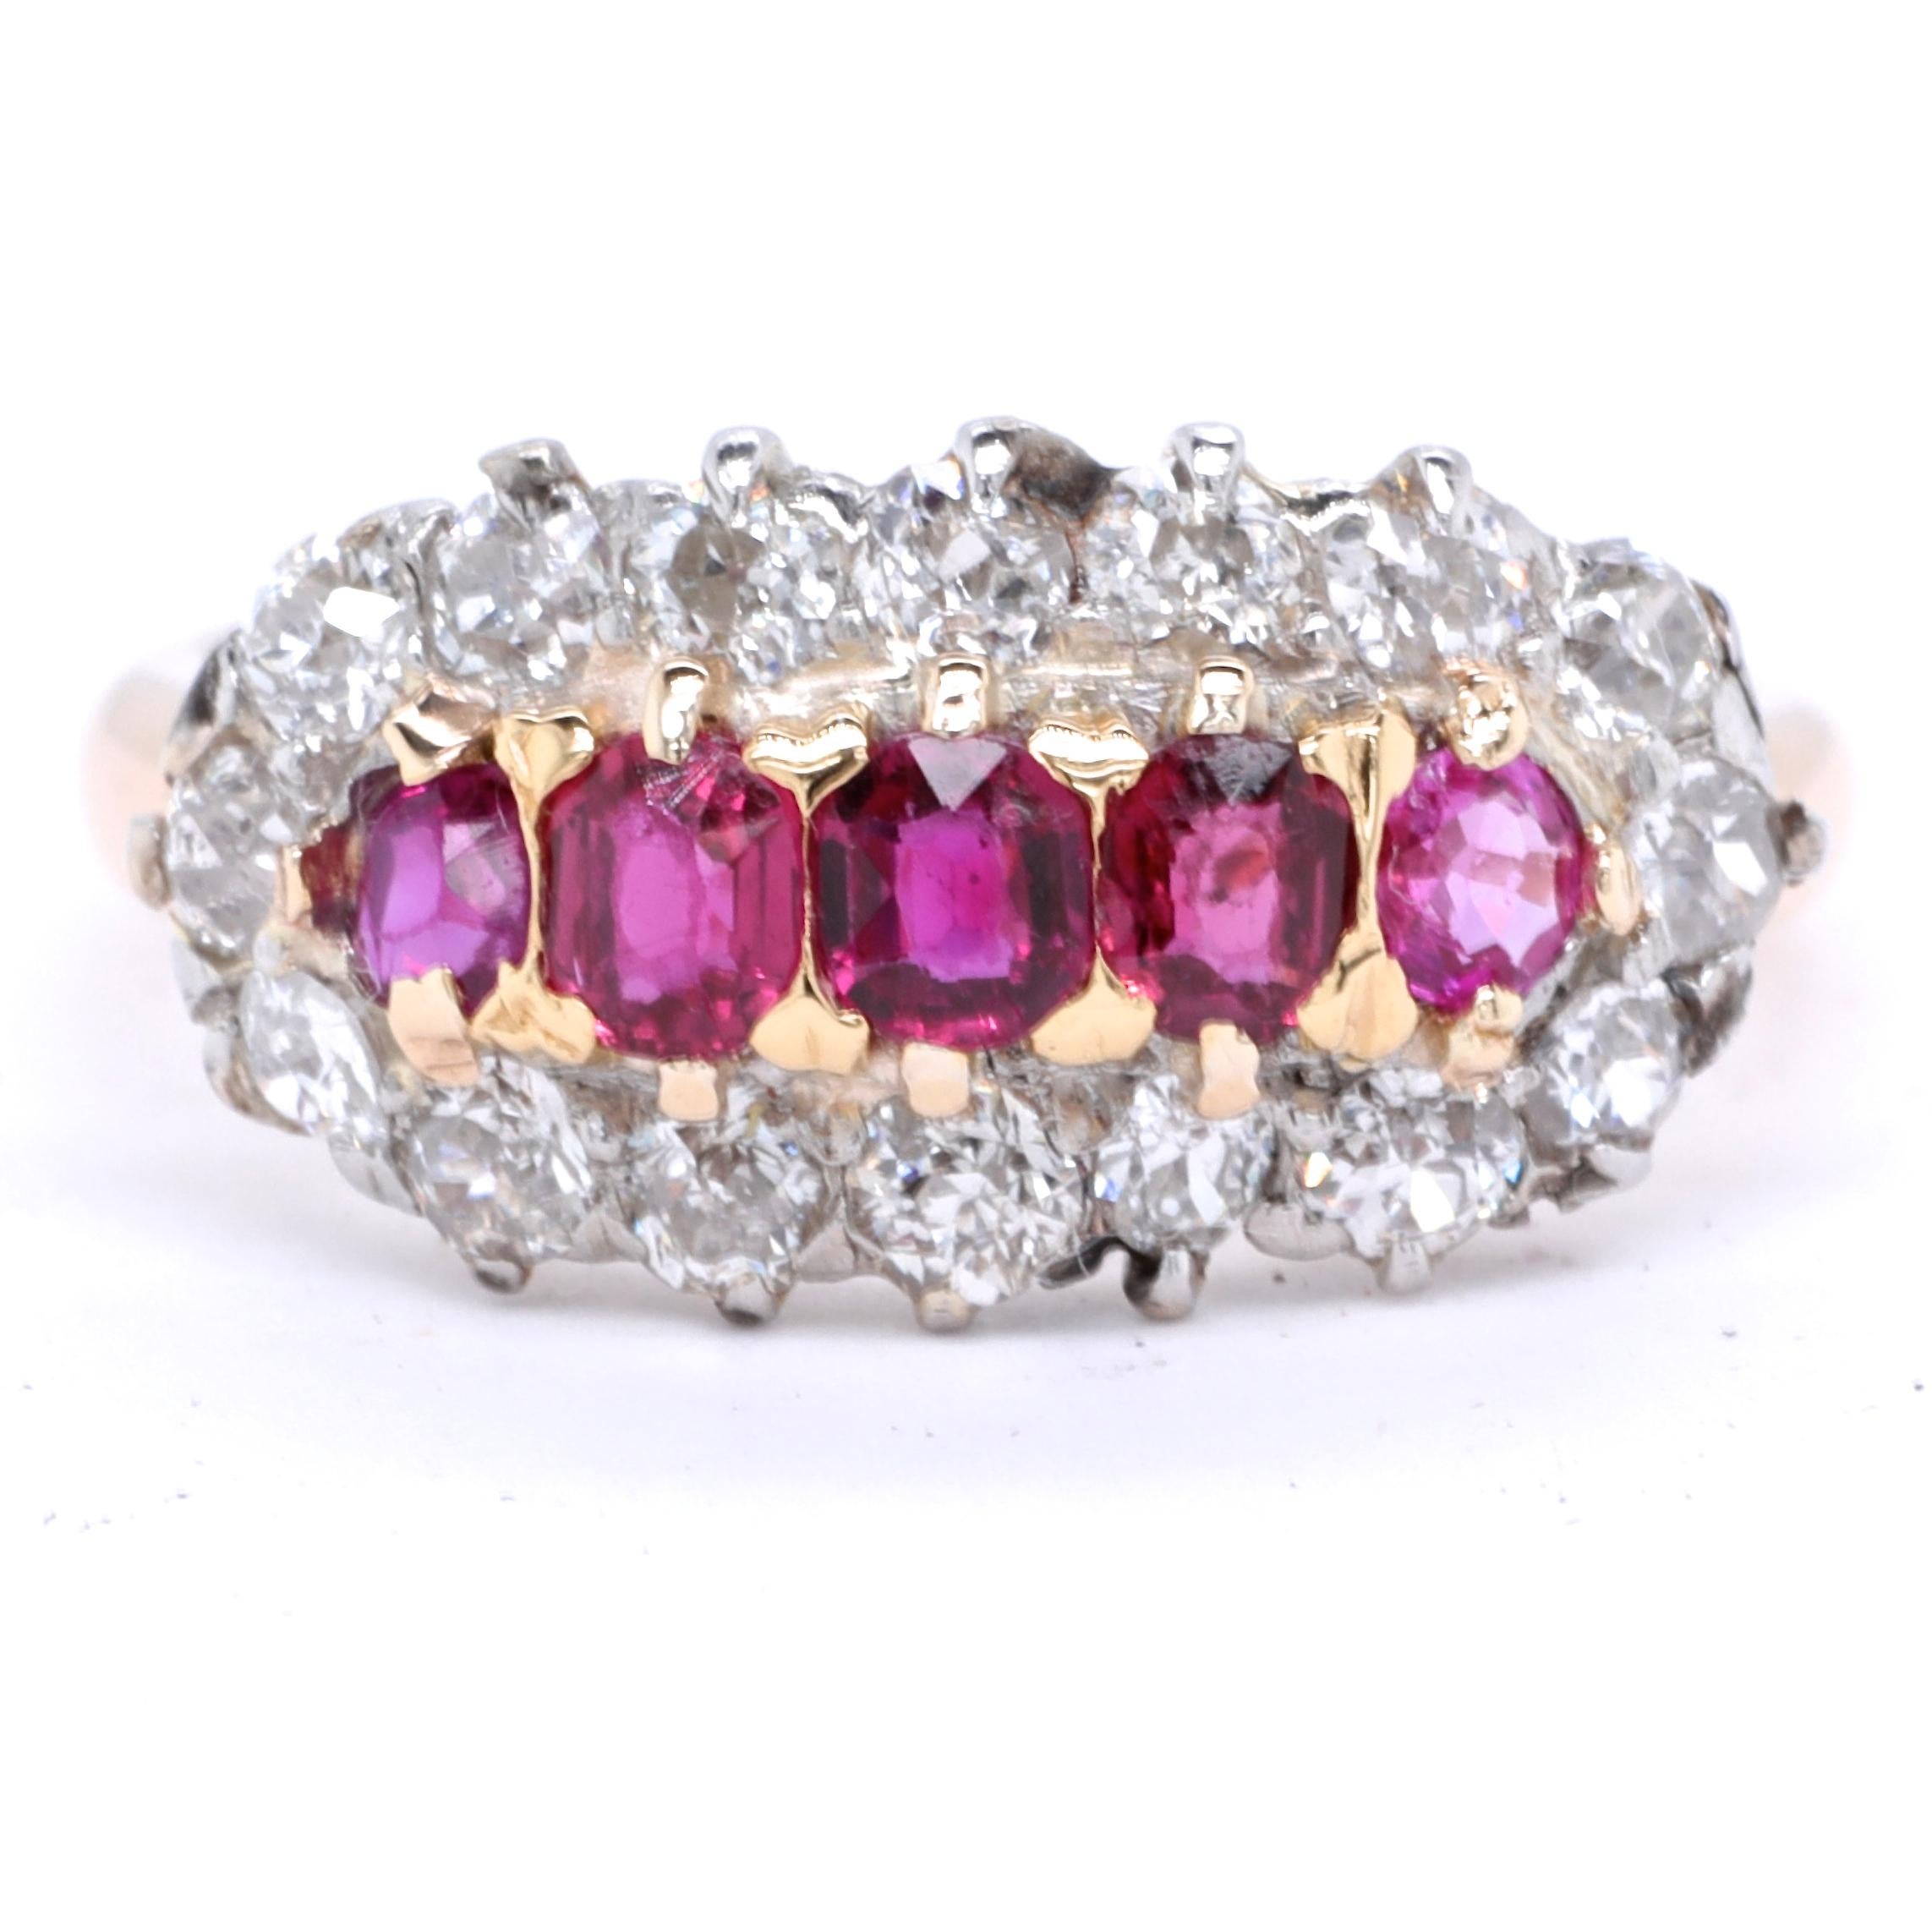 The vibrant pinkish-red color of these rubies just steals your heart away. Having 5 rubies in a row gives this ring a very unique vintage look. Charming and full of history, this is a Vintage Ruby Diamond Five Stone 18 Karat Gold Cluster Ring. The 5